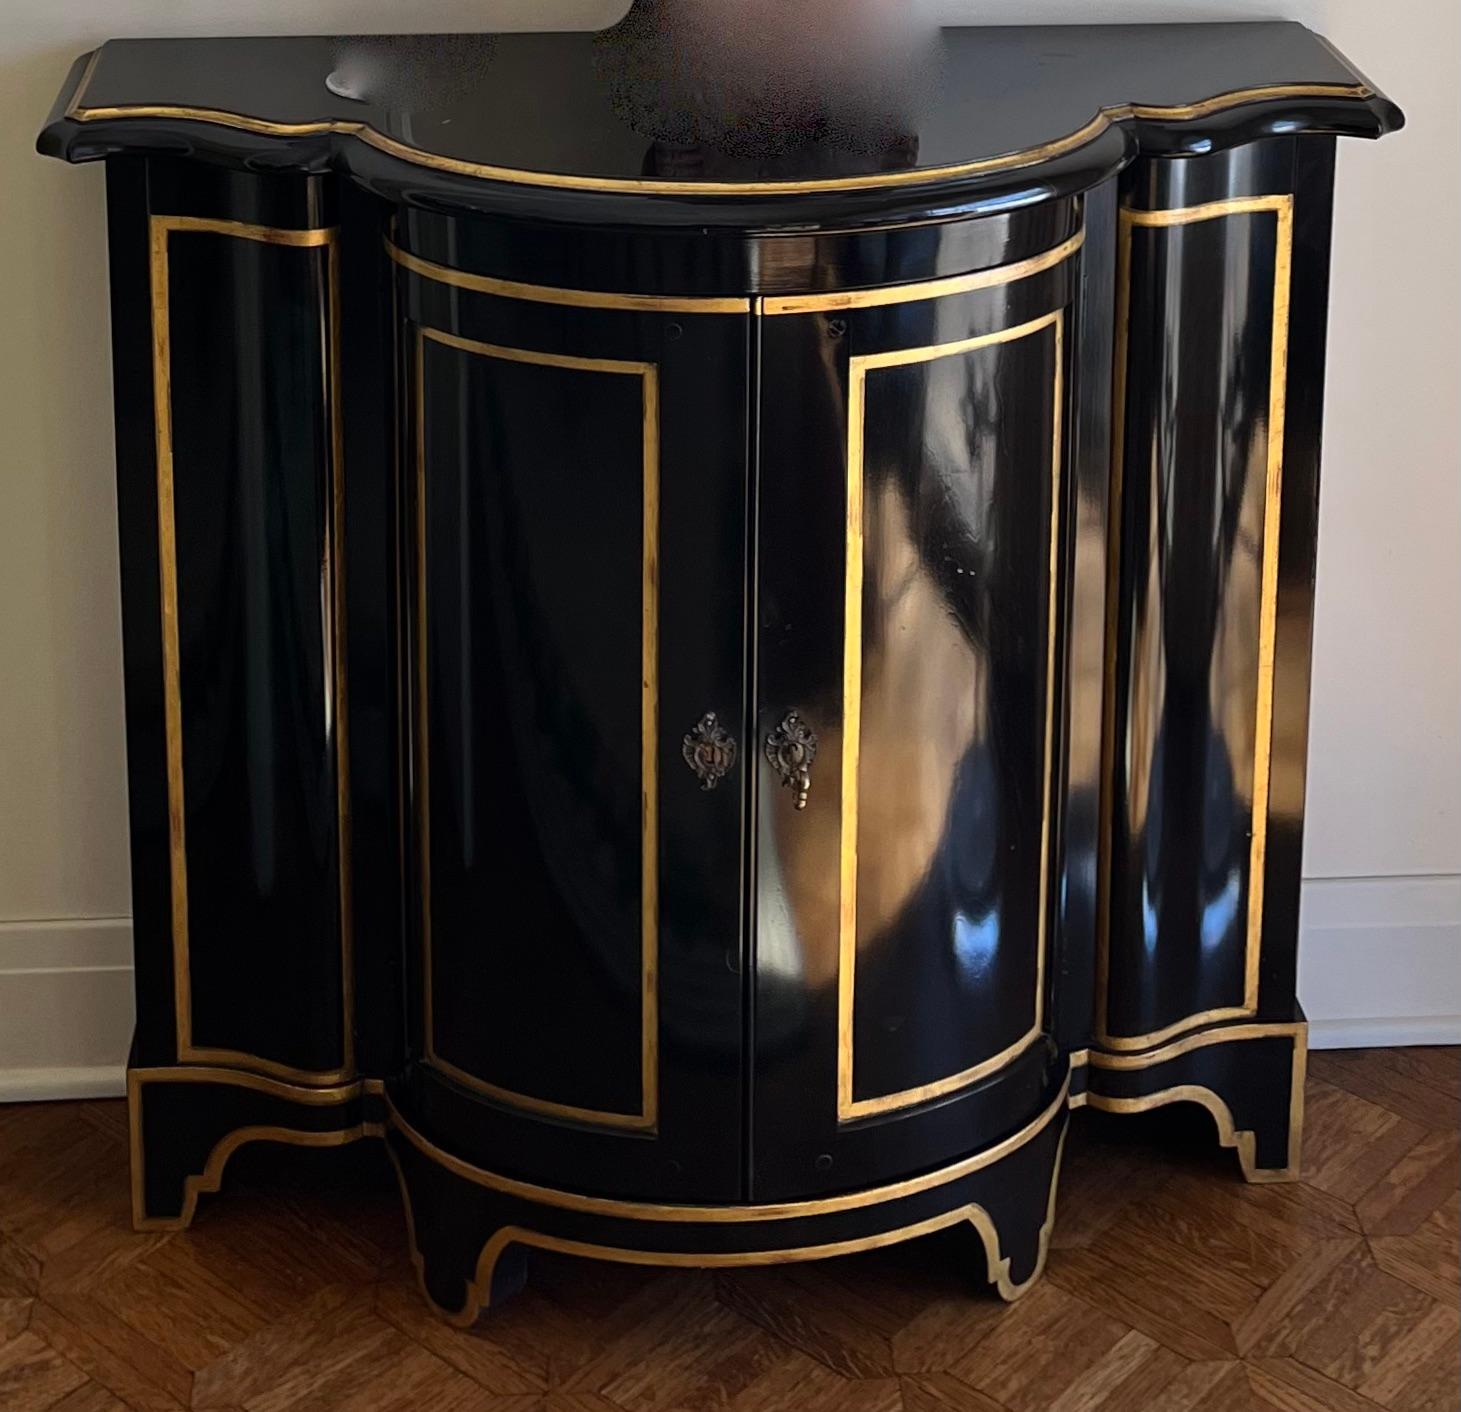 Mid-20th Century Pair of Ebonized and Gilt Demi-Lune Cabinets by Baker Furniture Co